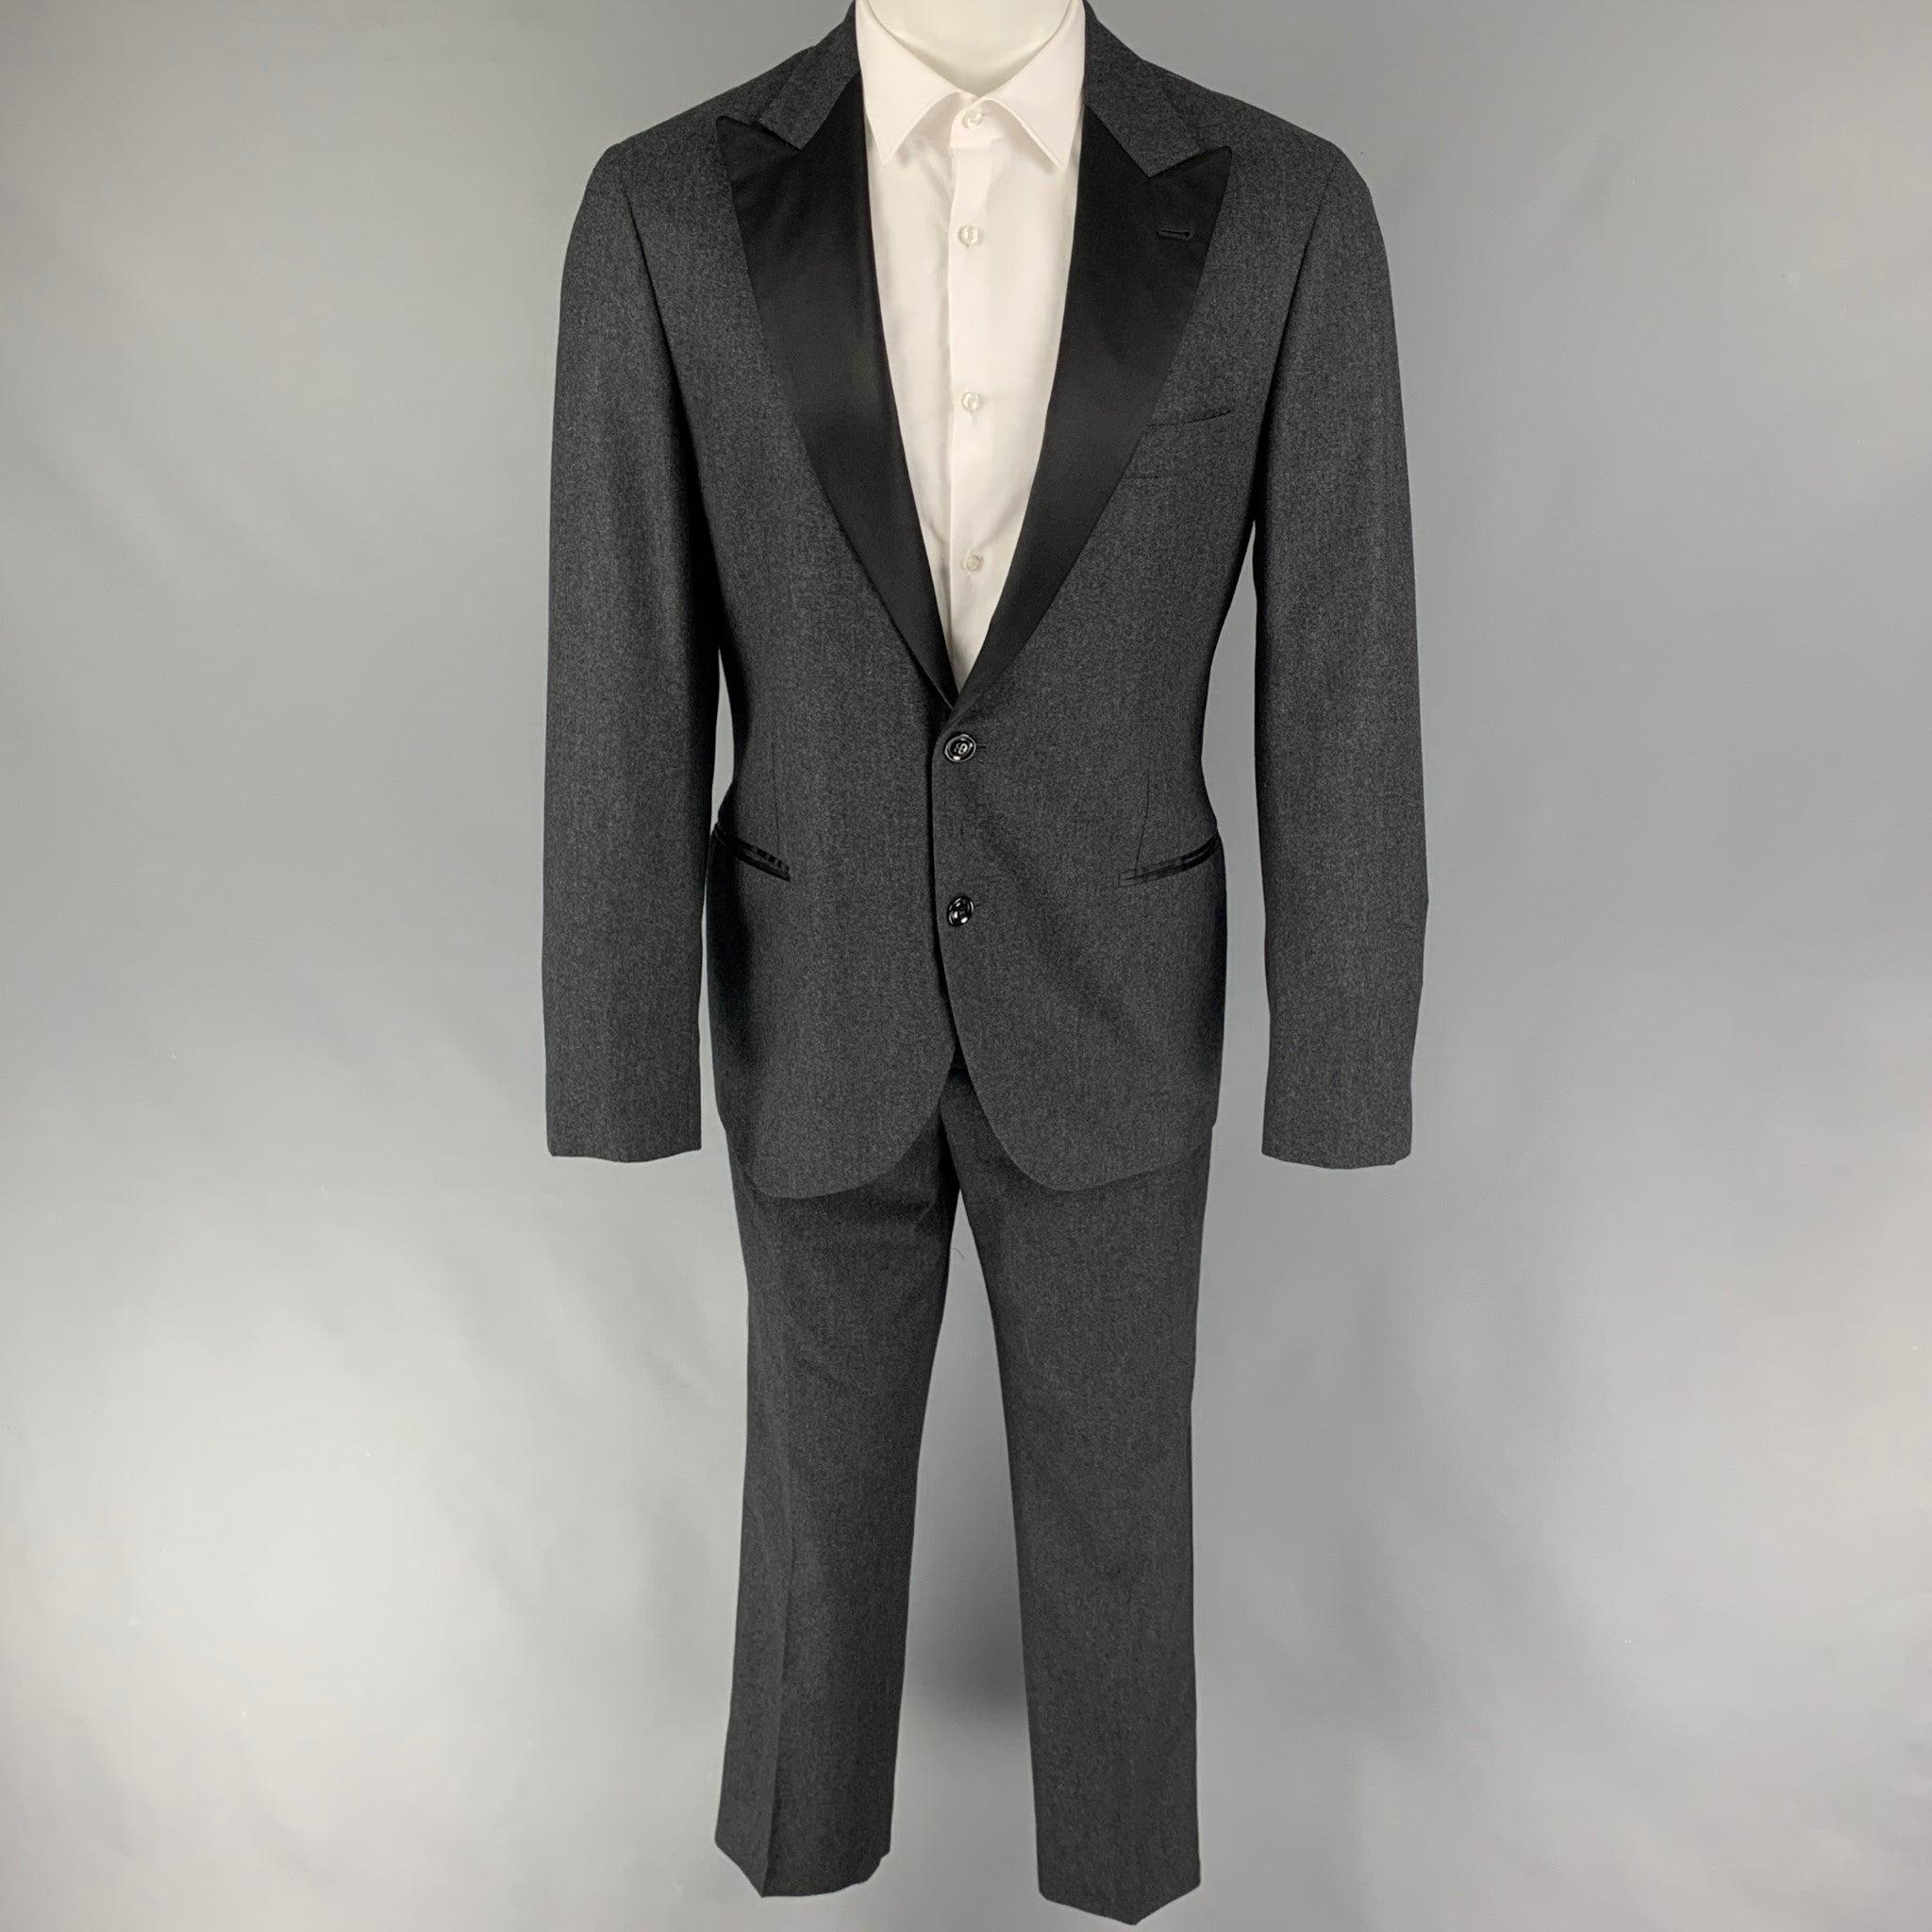 BRUNELLO CUCINELLI
tuxedo suit comes in a gray & black wool blend with a full liner and includes a single breasted, double button sport coat with a peak lapel and matching flat front trousers. Includes garment bag. Made in Italy. New with tags. 